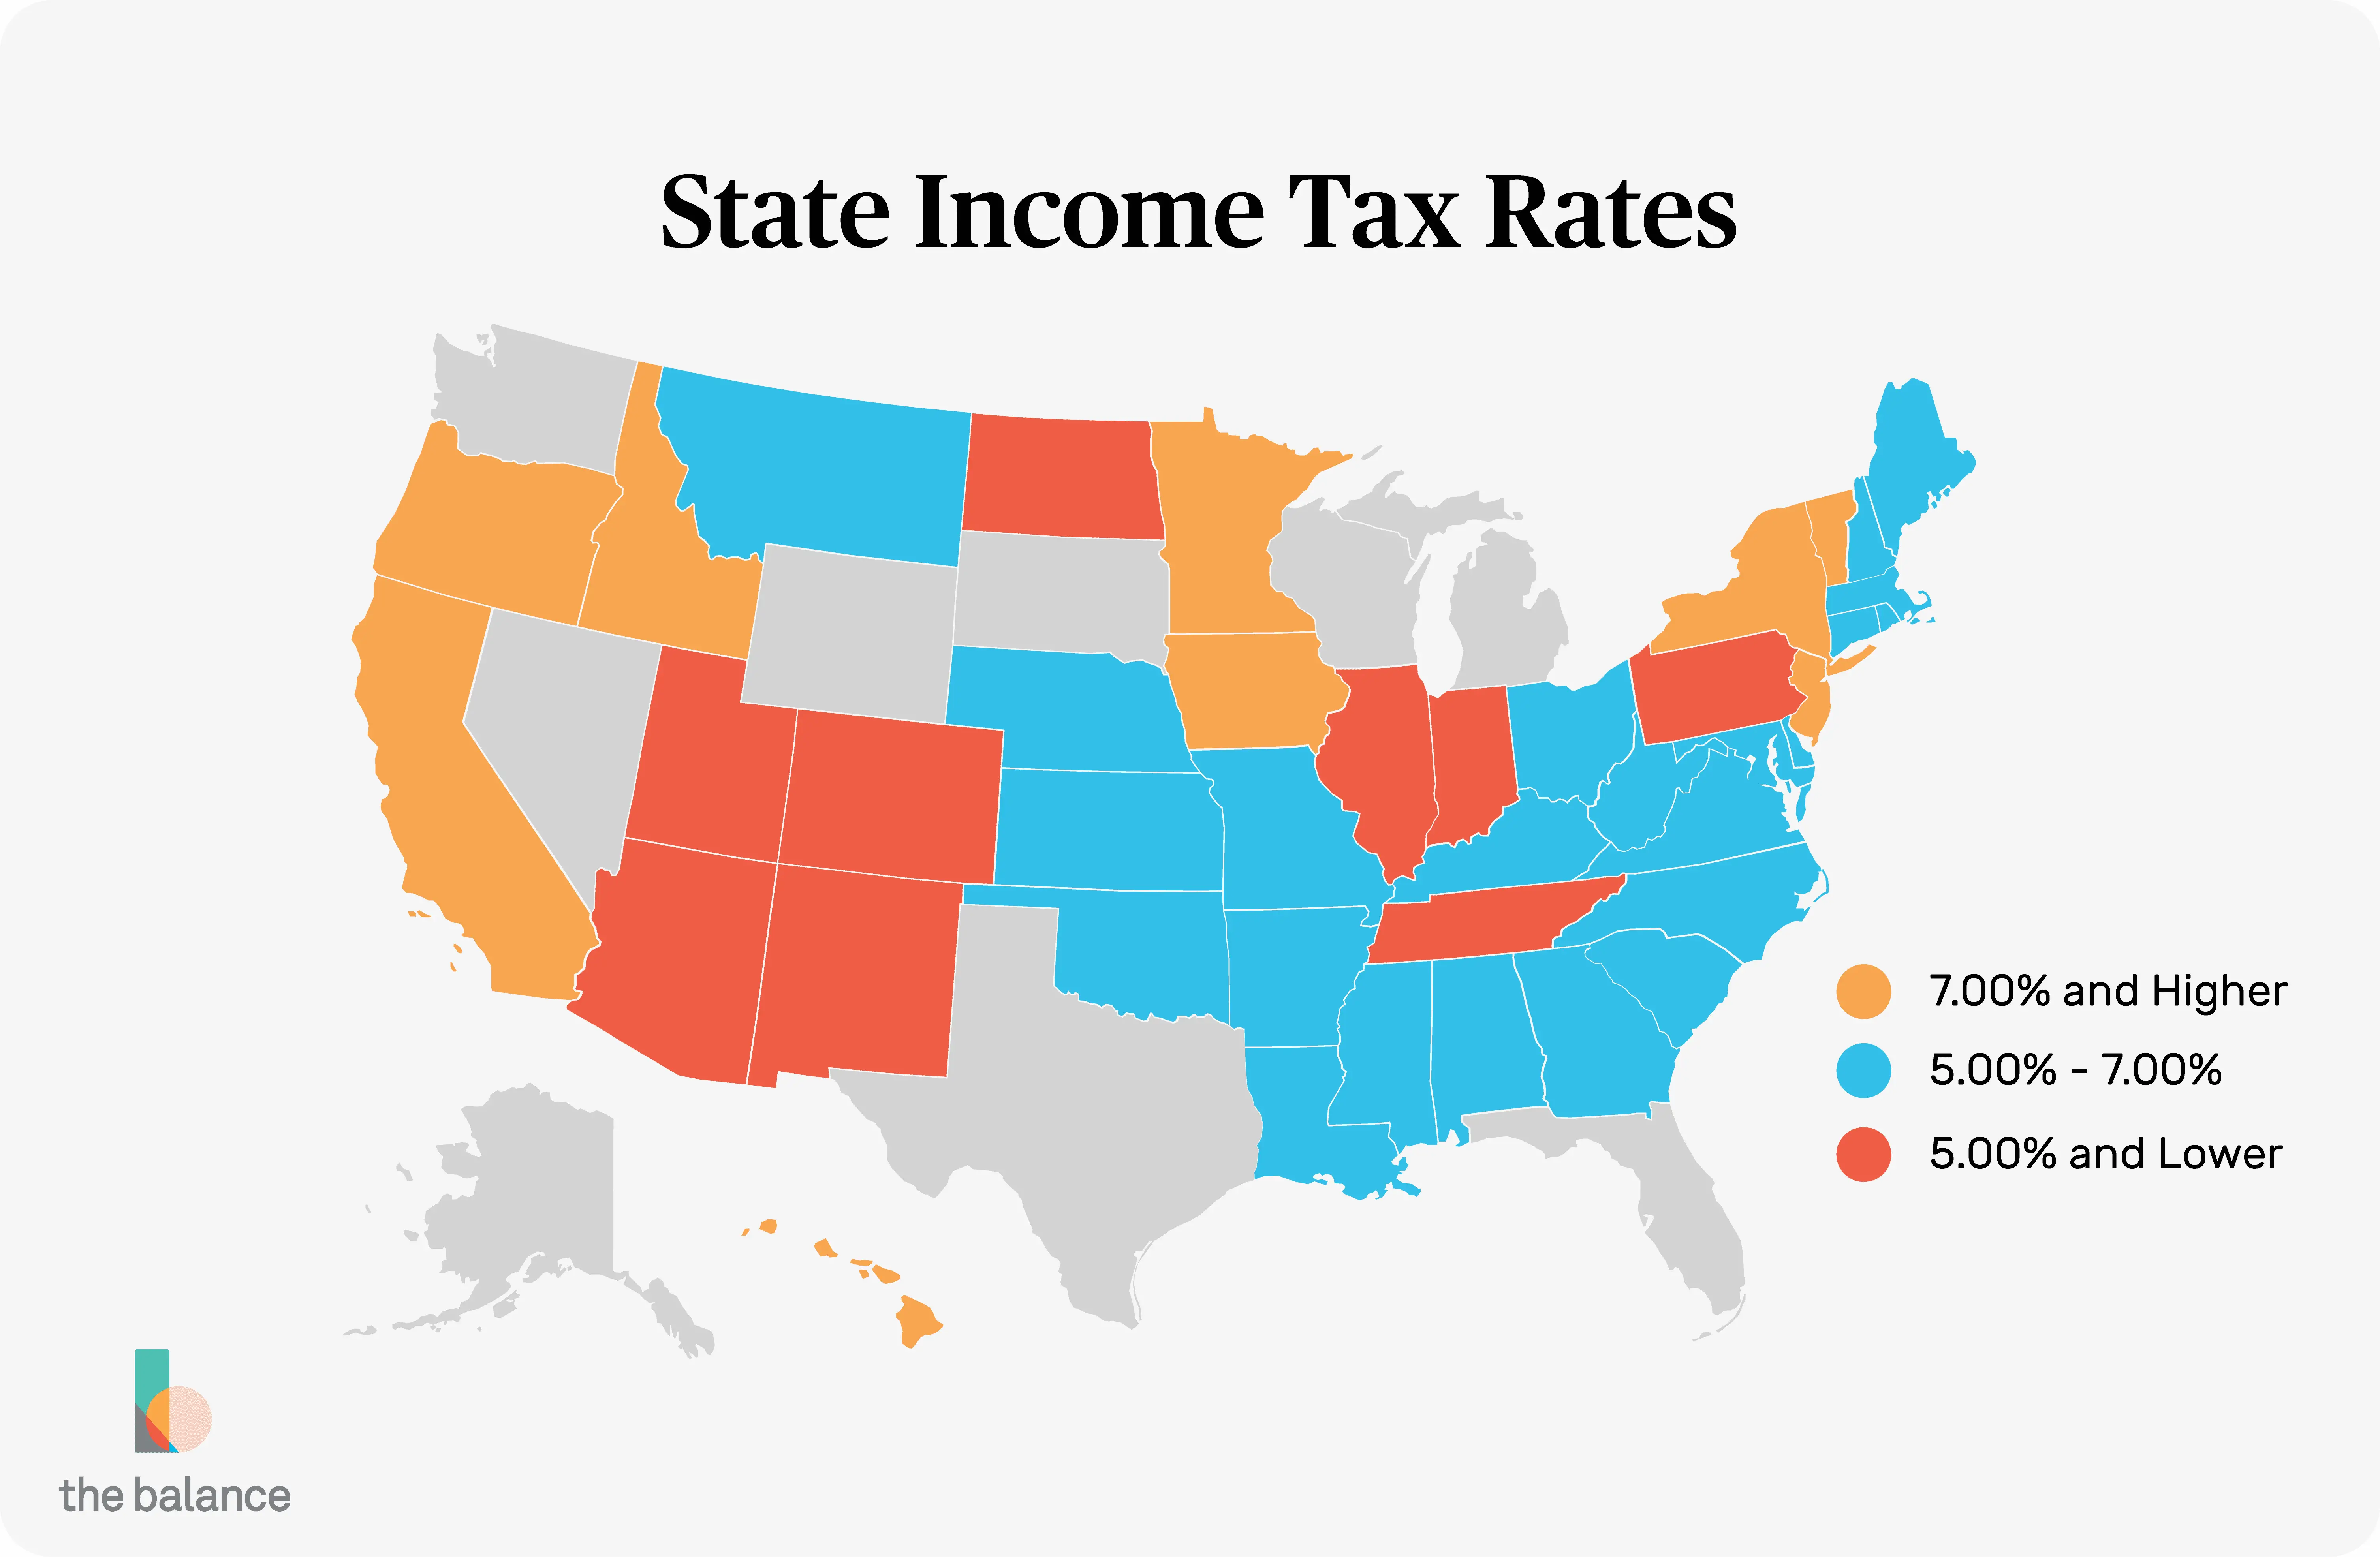 A List of Income Tax Rates for Each State